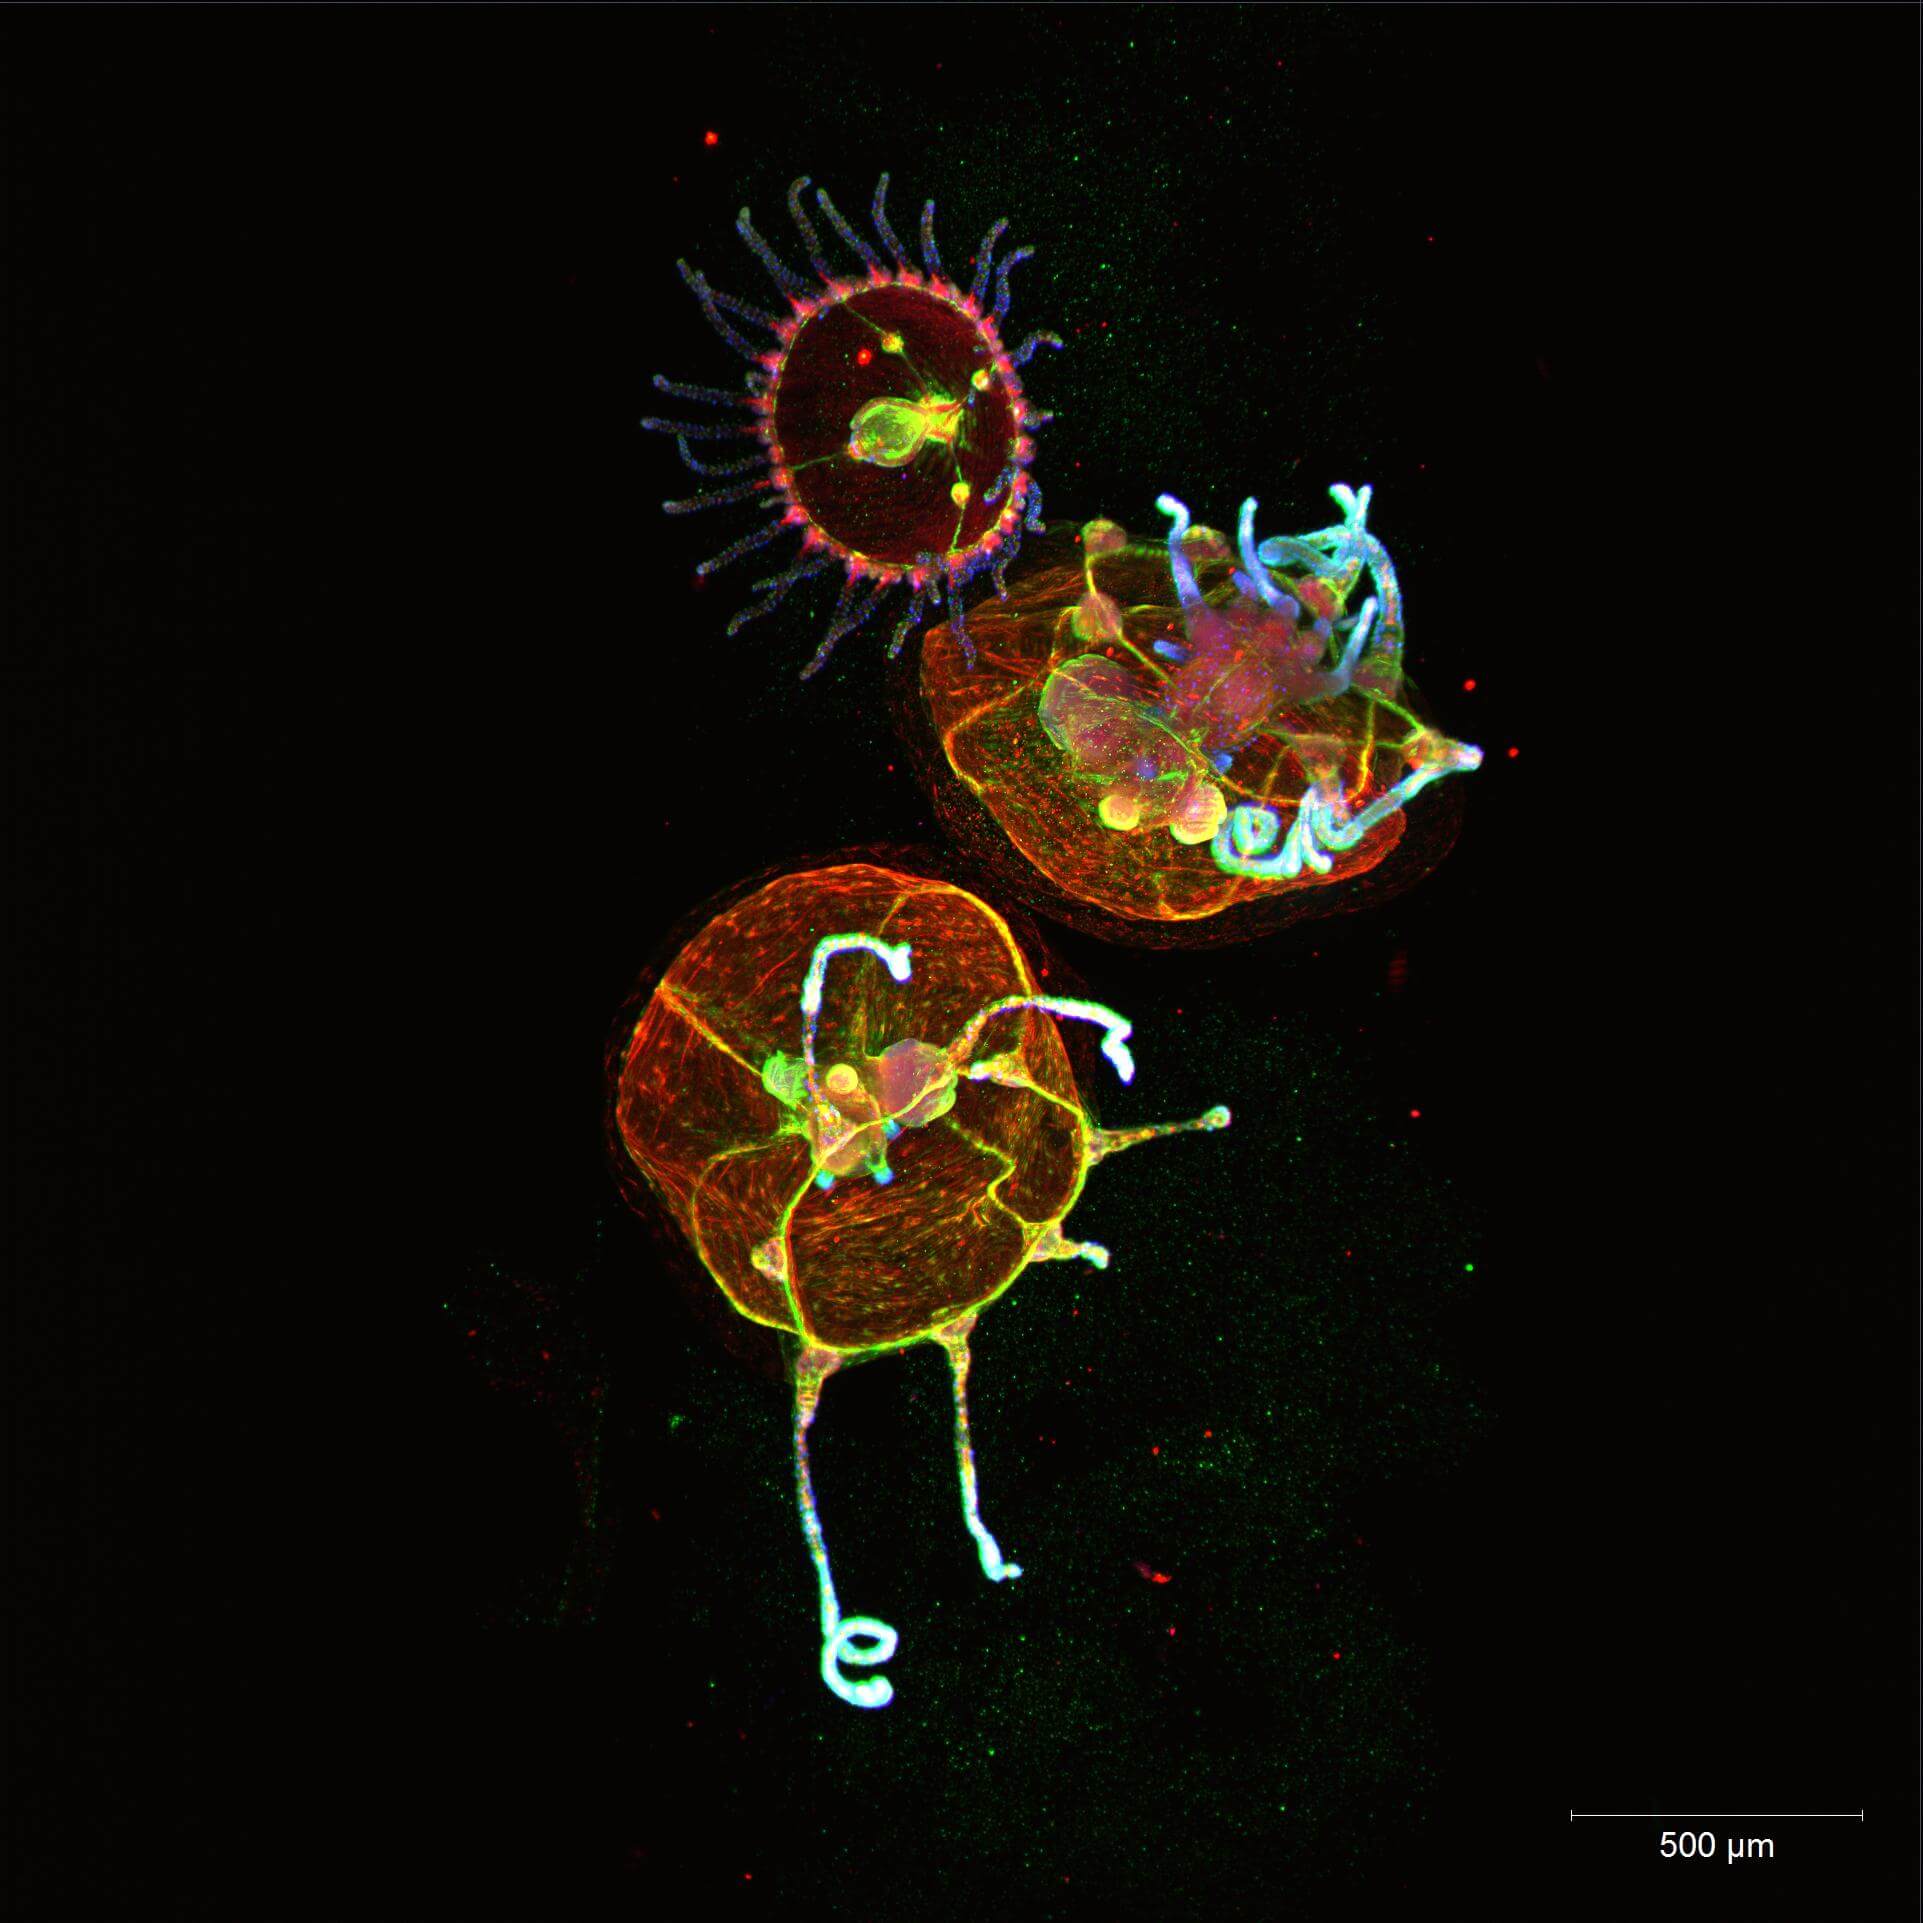 Title: Cnidaria, MultiView Light Sheet Microscopy (3 of 4) | Author: Helena Parra | Source: ZEISS Microscopy | License: CC BY-NC-ND 2.0